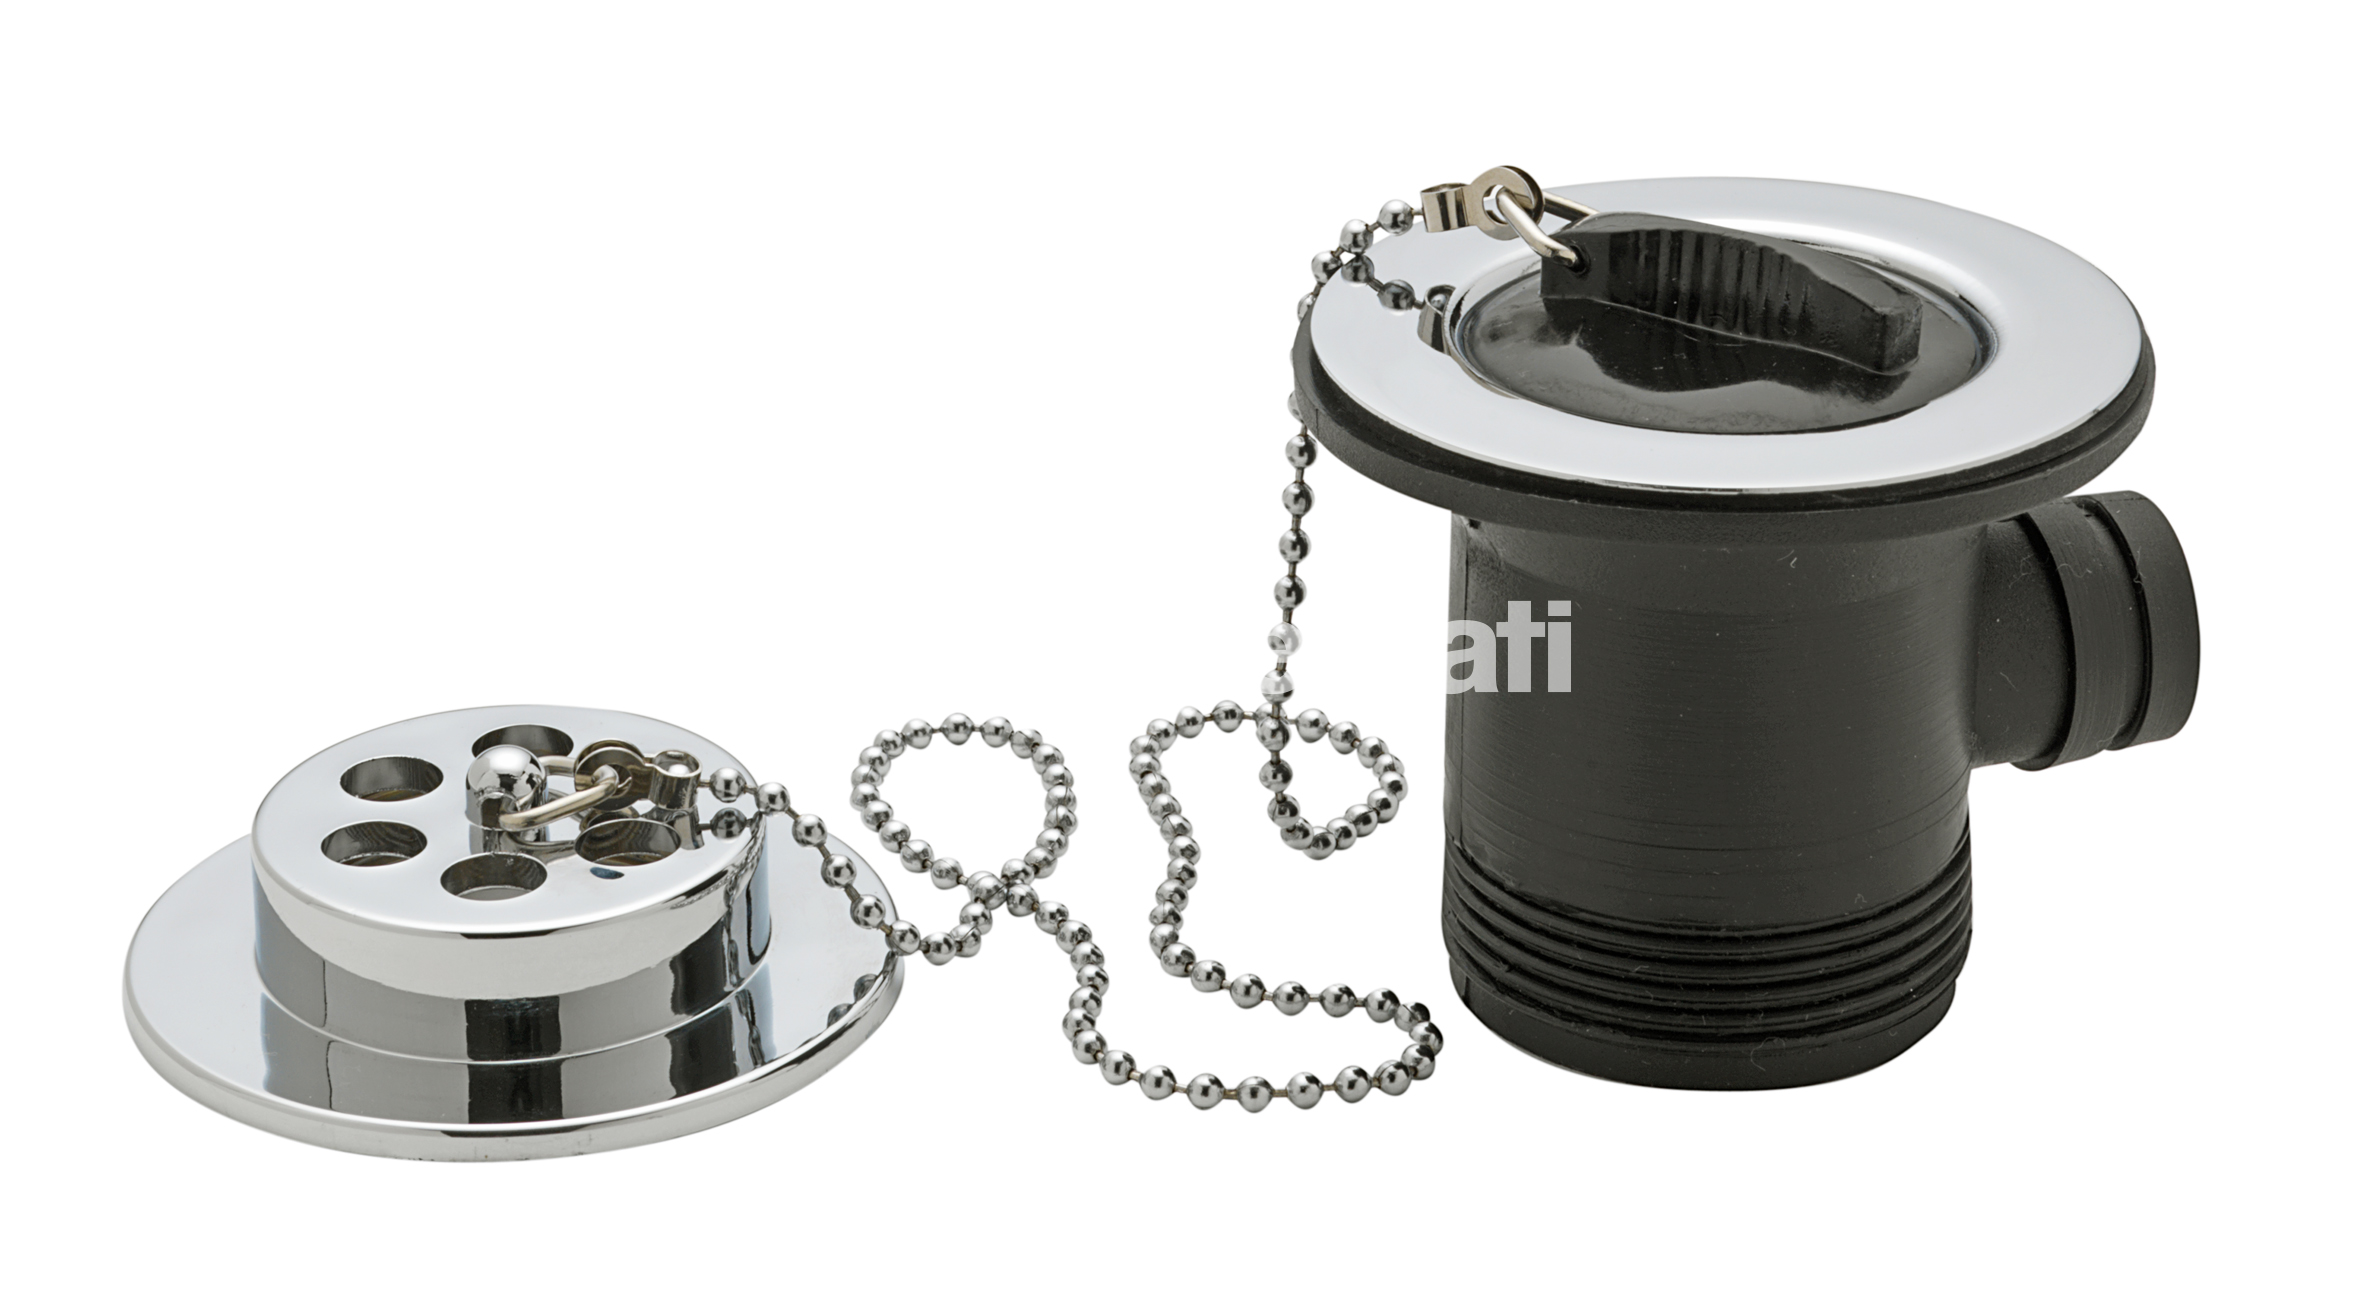 Tre Mercati 1.1/2in BSP Bath Waste & Overflow - Brass Flange - With Rubber Plug & Ball Chain - Chrome Plated